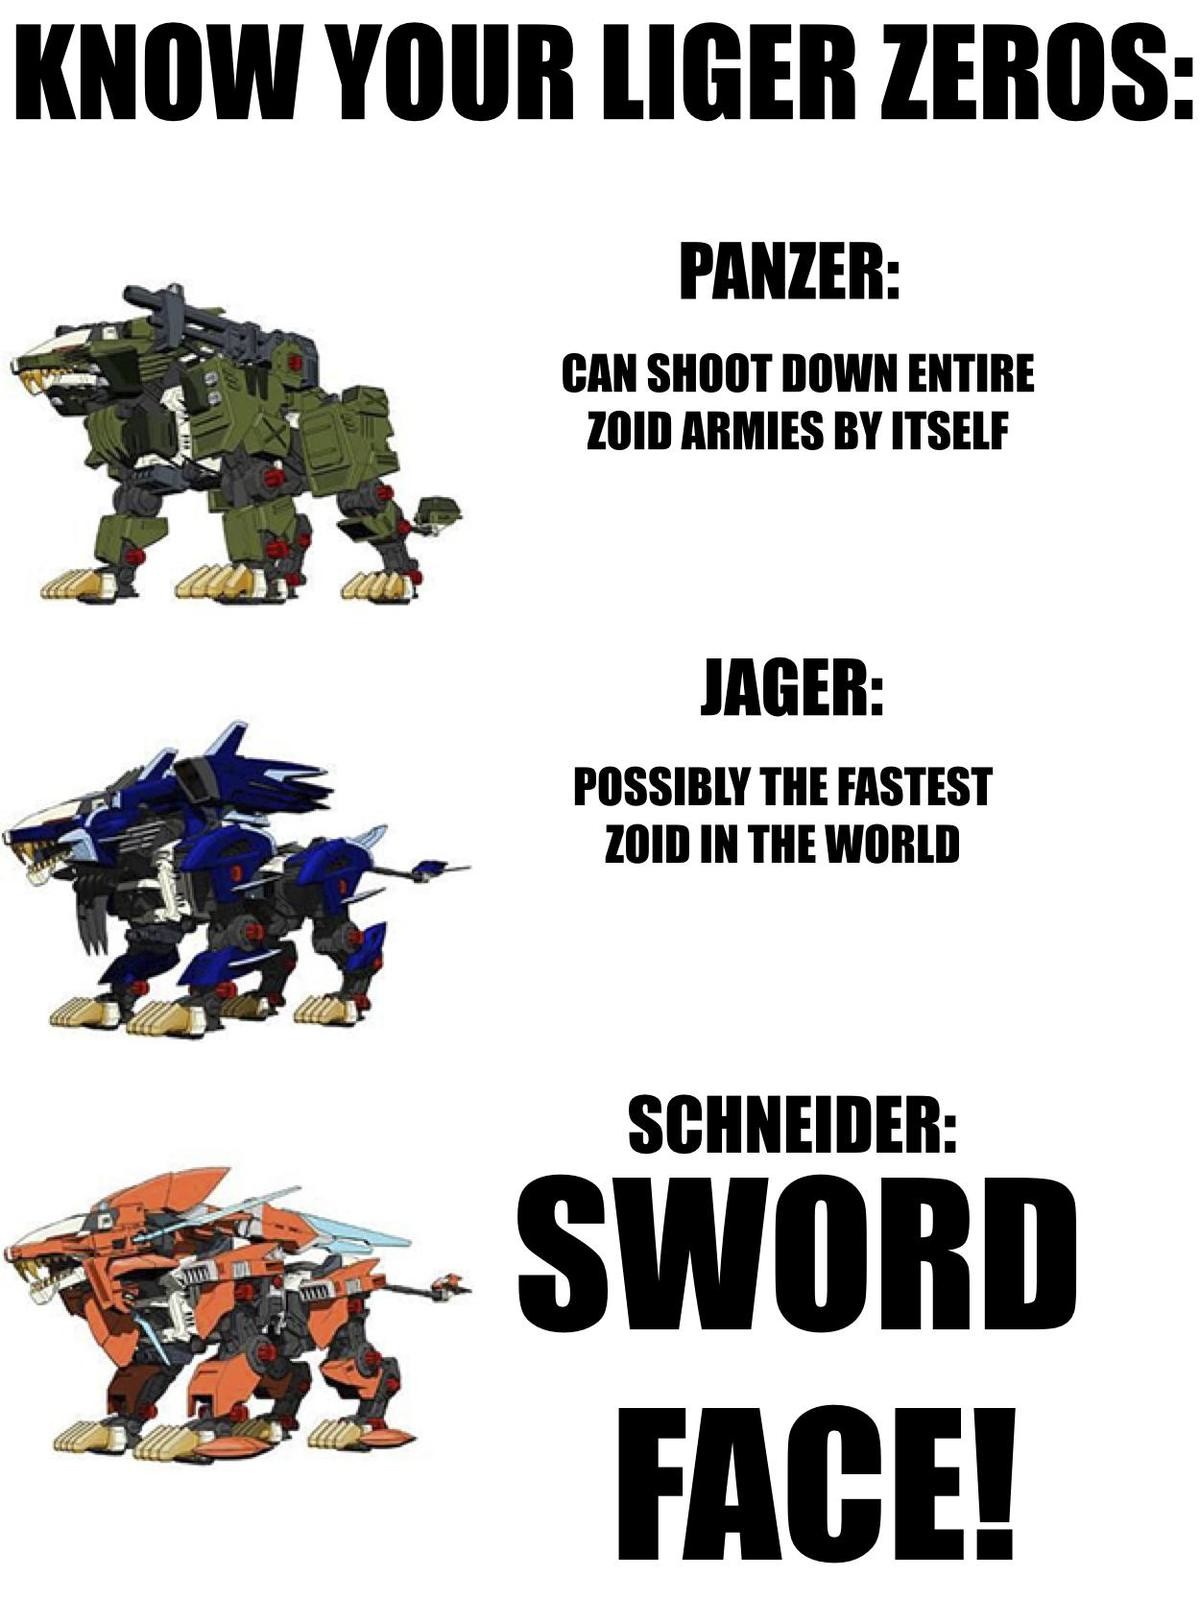 SWORD FACE. .. Panzer: such a One and done it can barely move and only can only blow its load once before and has to eject all armor after a few minutes to avoid serious struc